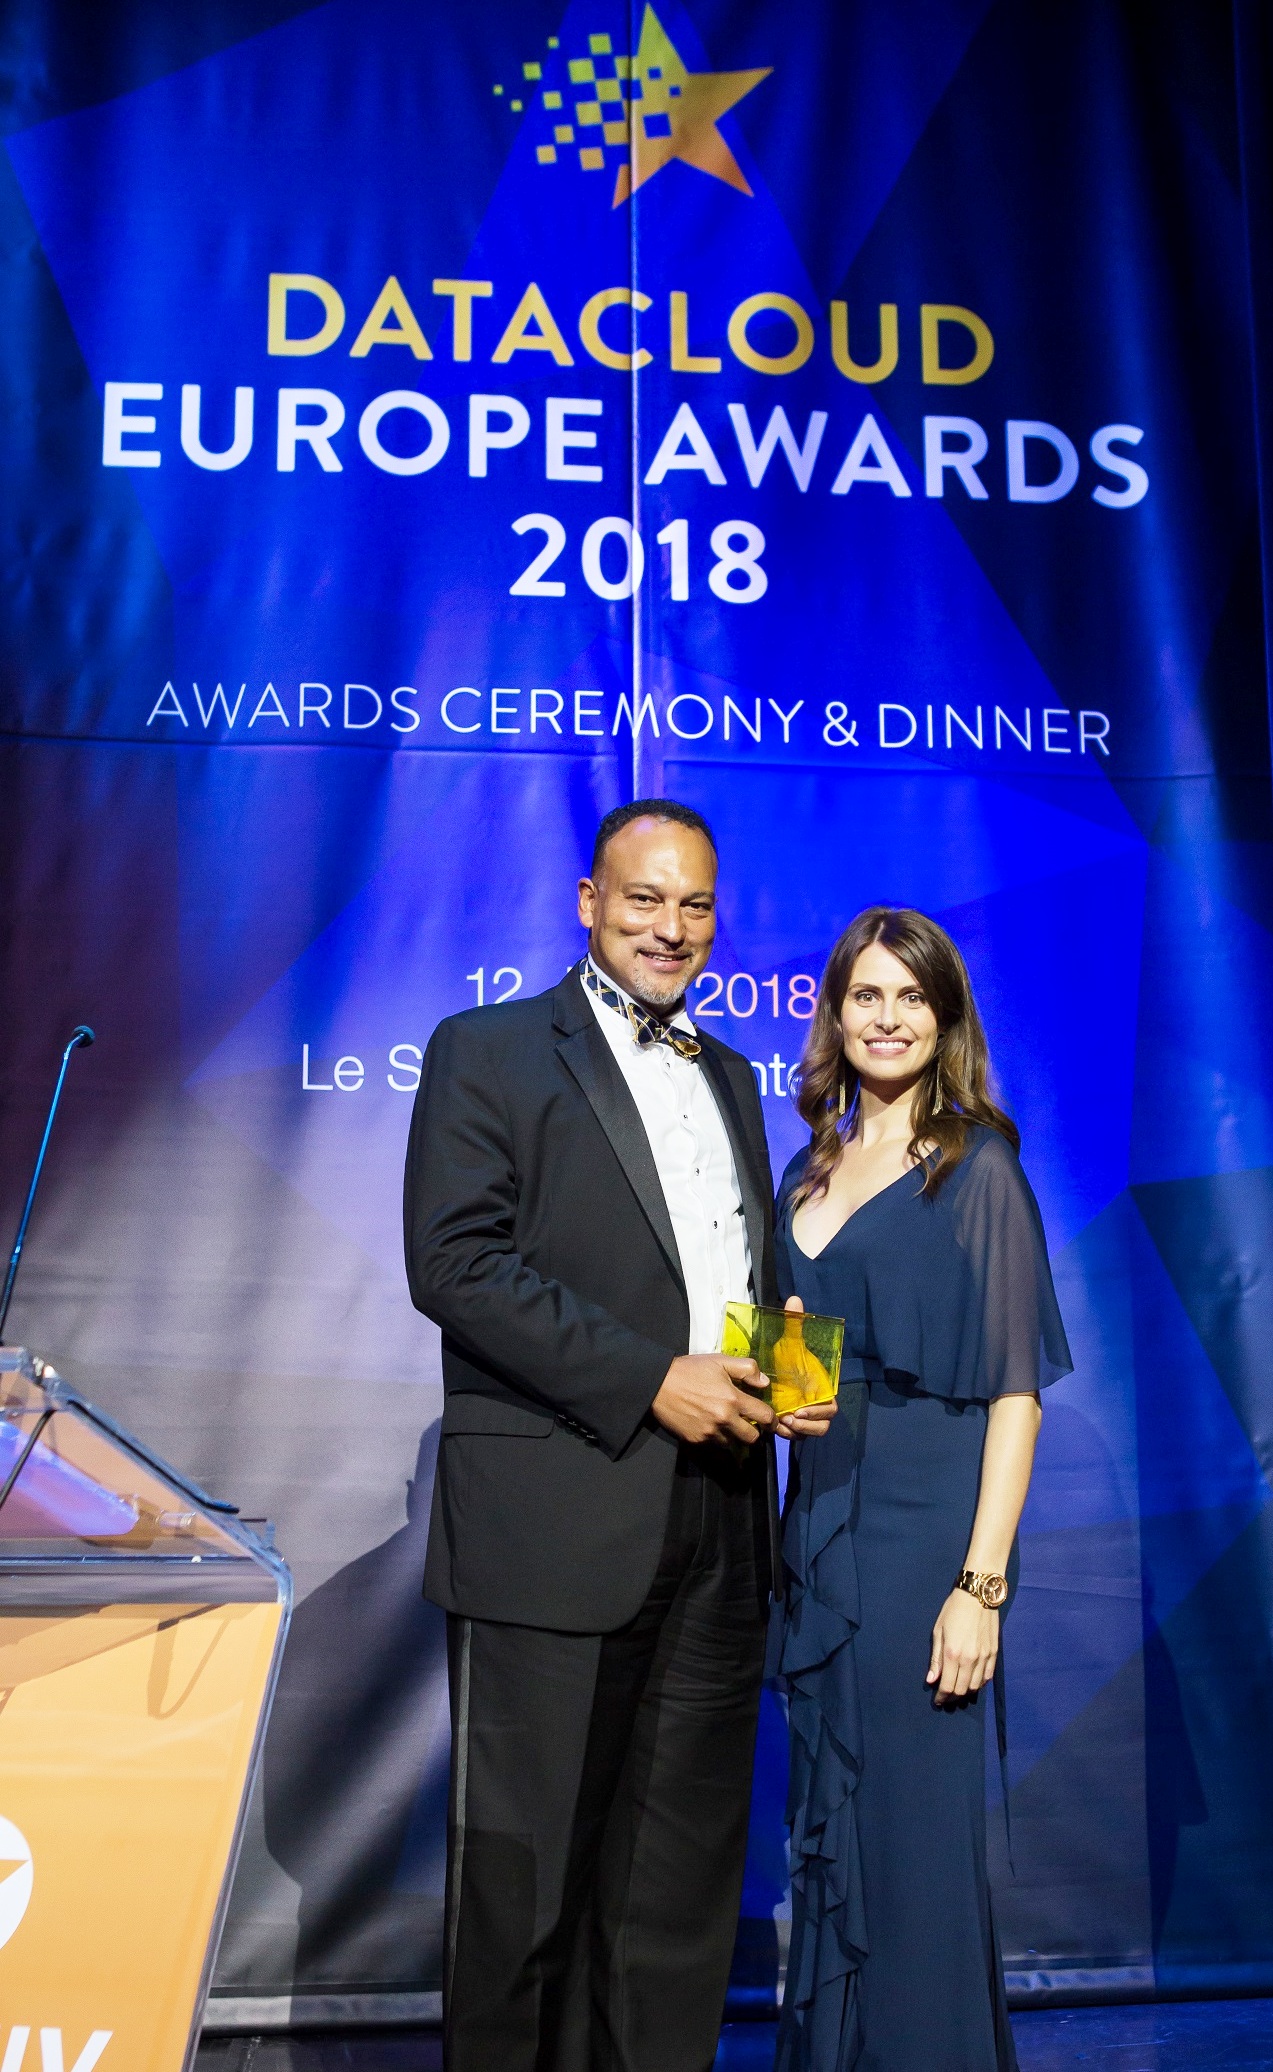 The Managing Director of Rack Centre Ayotunde Coker with Ellie Taylor the Presenter and renowned English Comedian at the recent Datacloud Europe Awards in Monaco